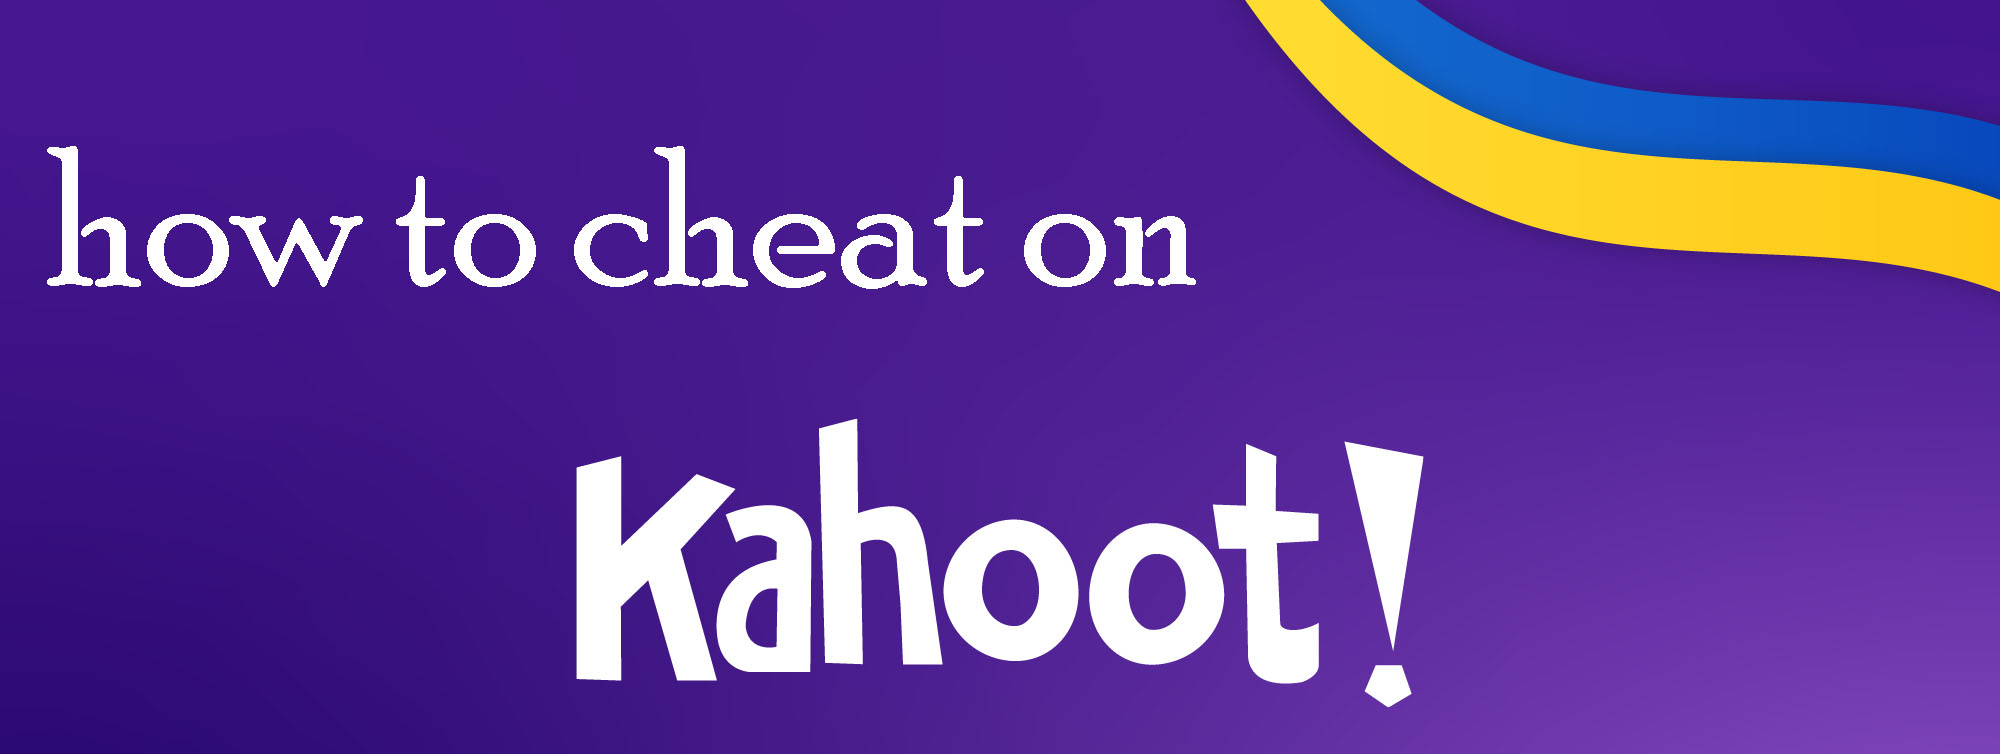 how to cheat on kahoot